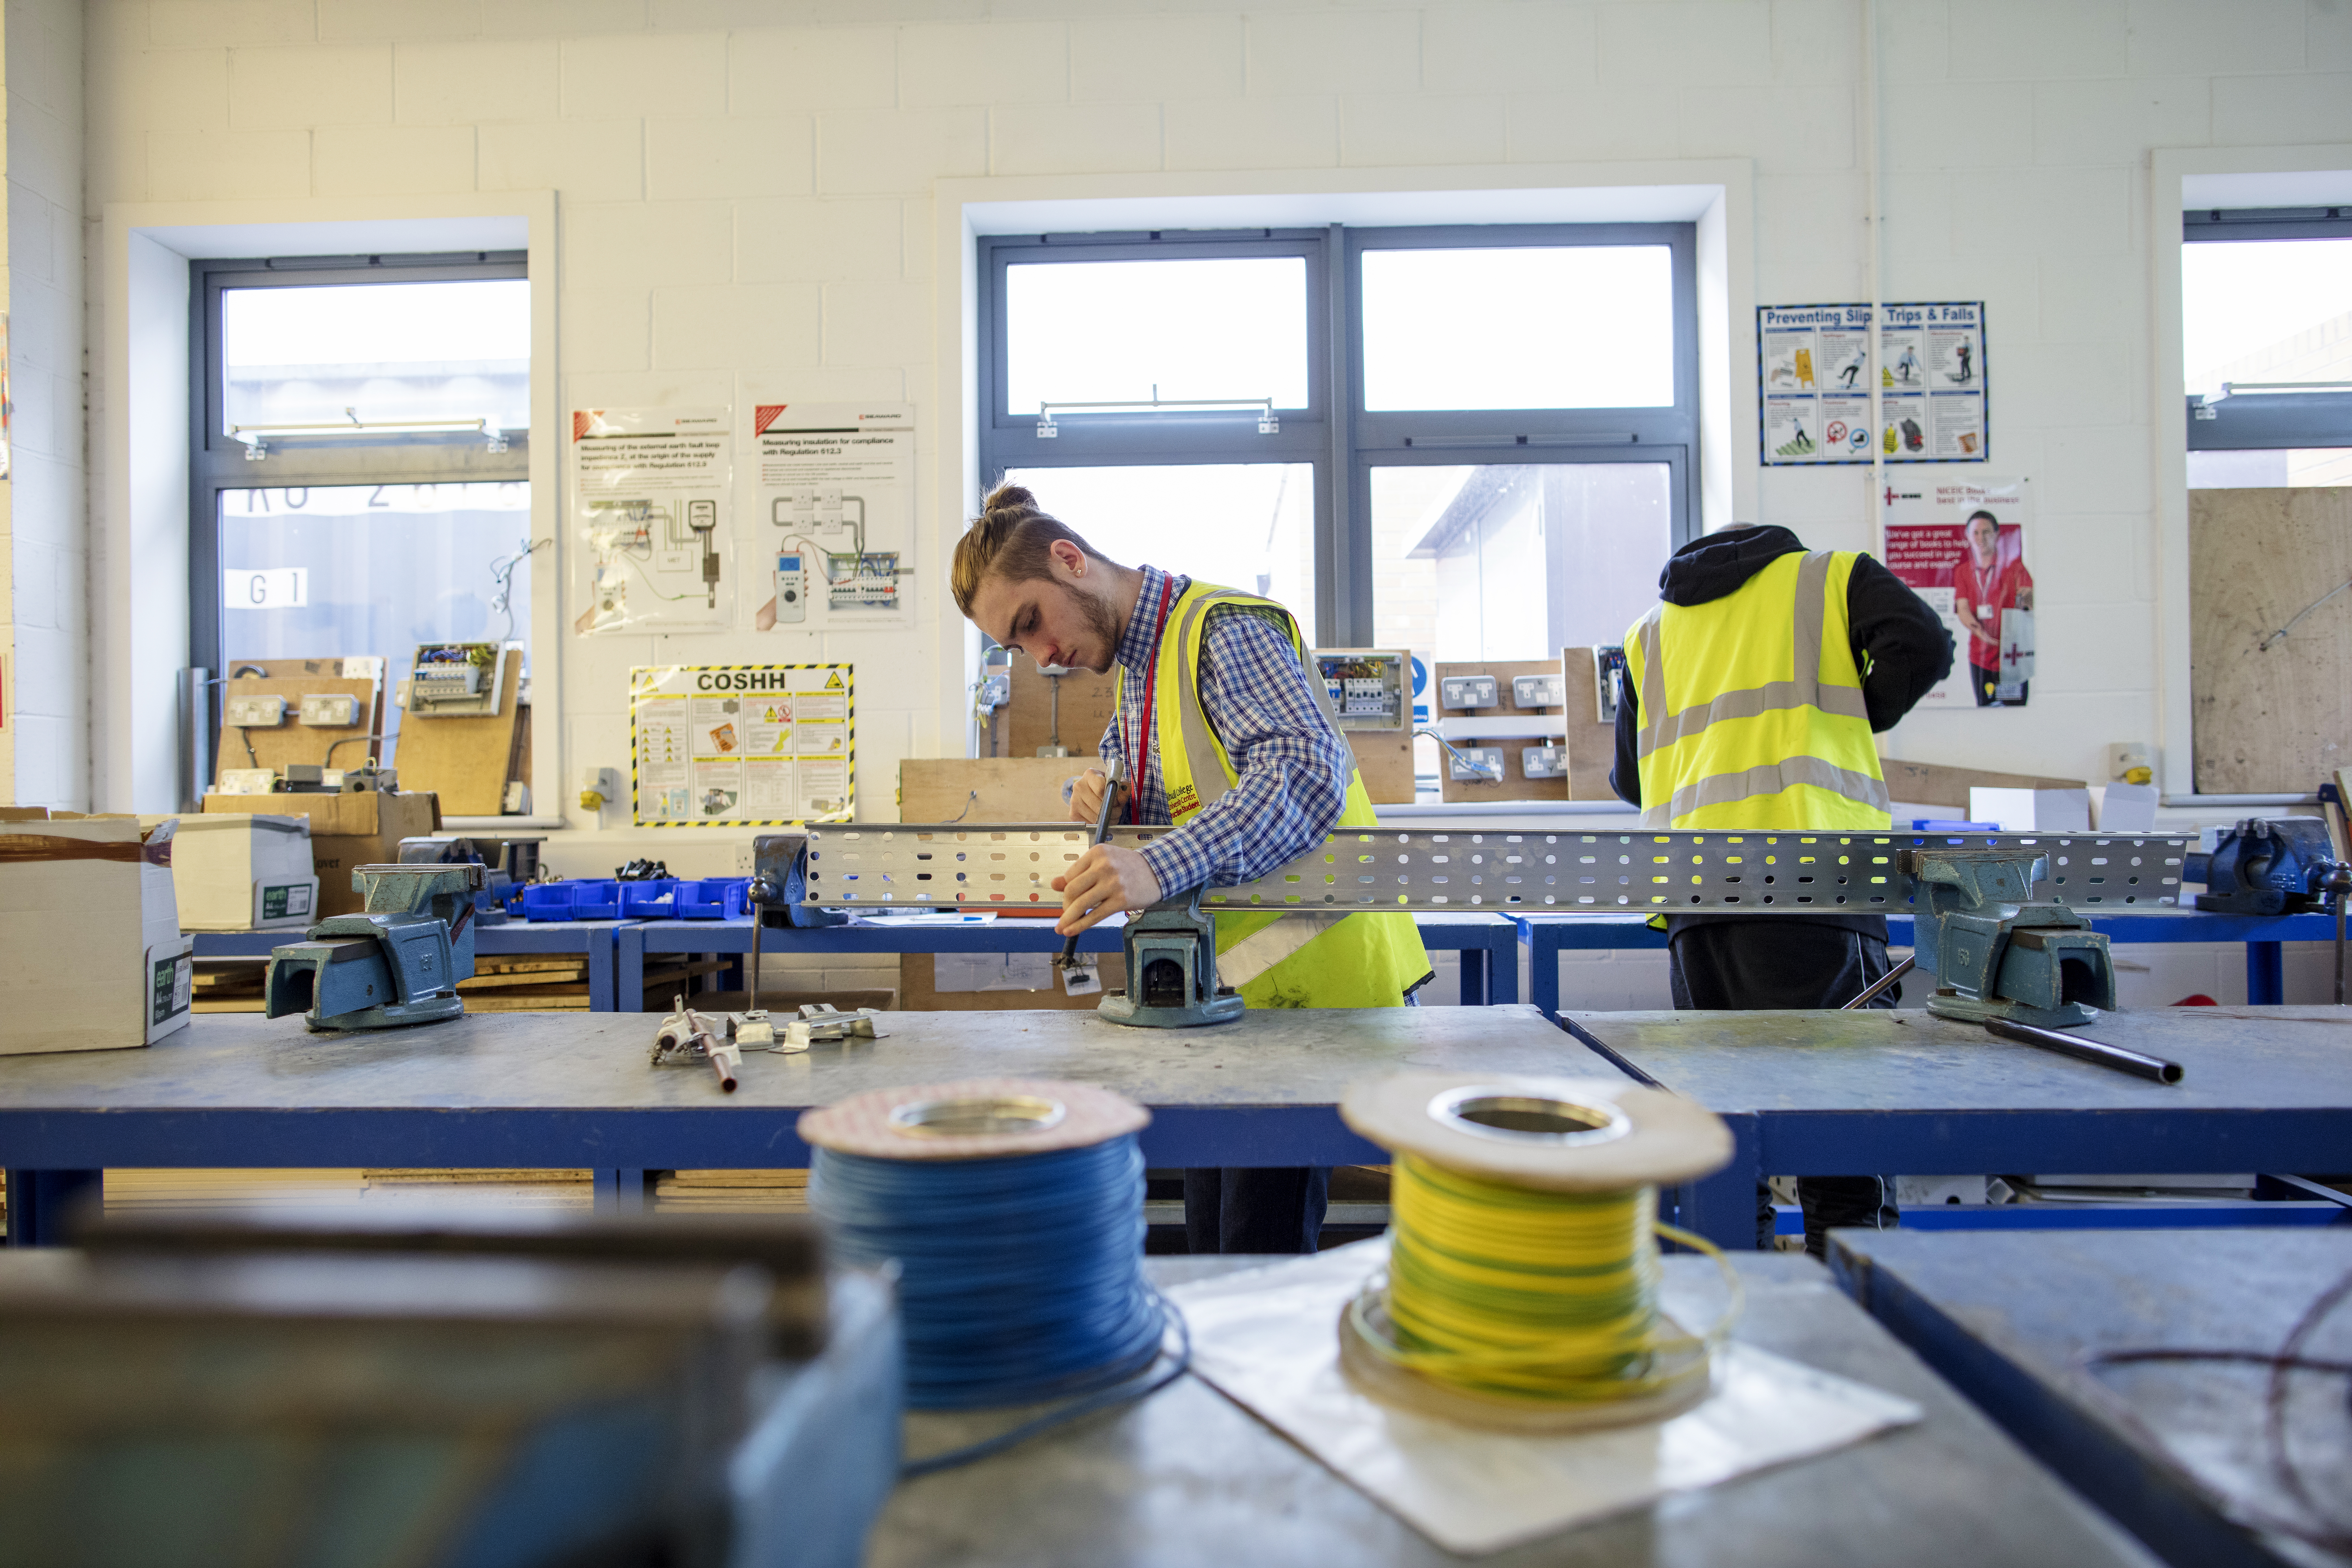 Region’s unemployed to benefit from £9 million training package targeting key sectors like care and construction